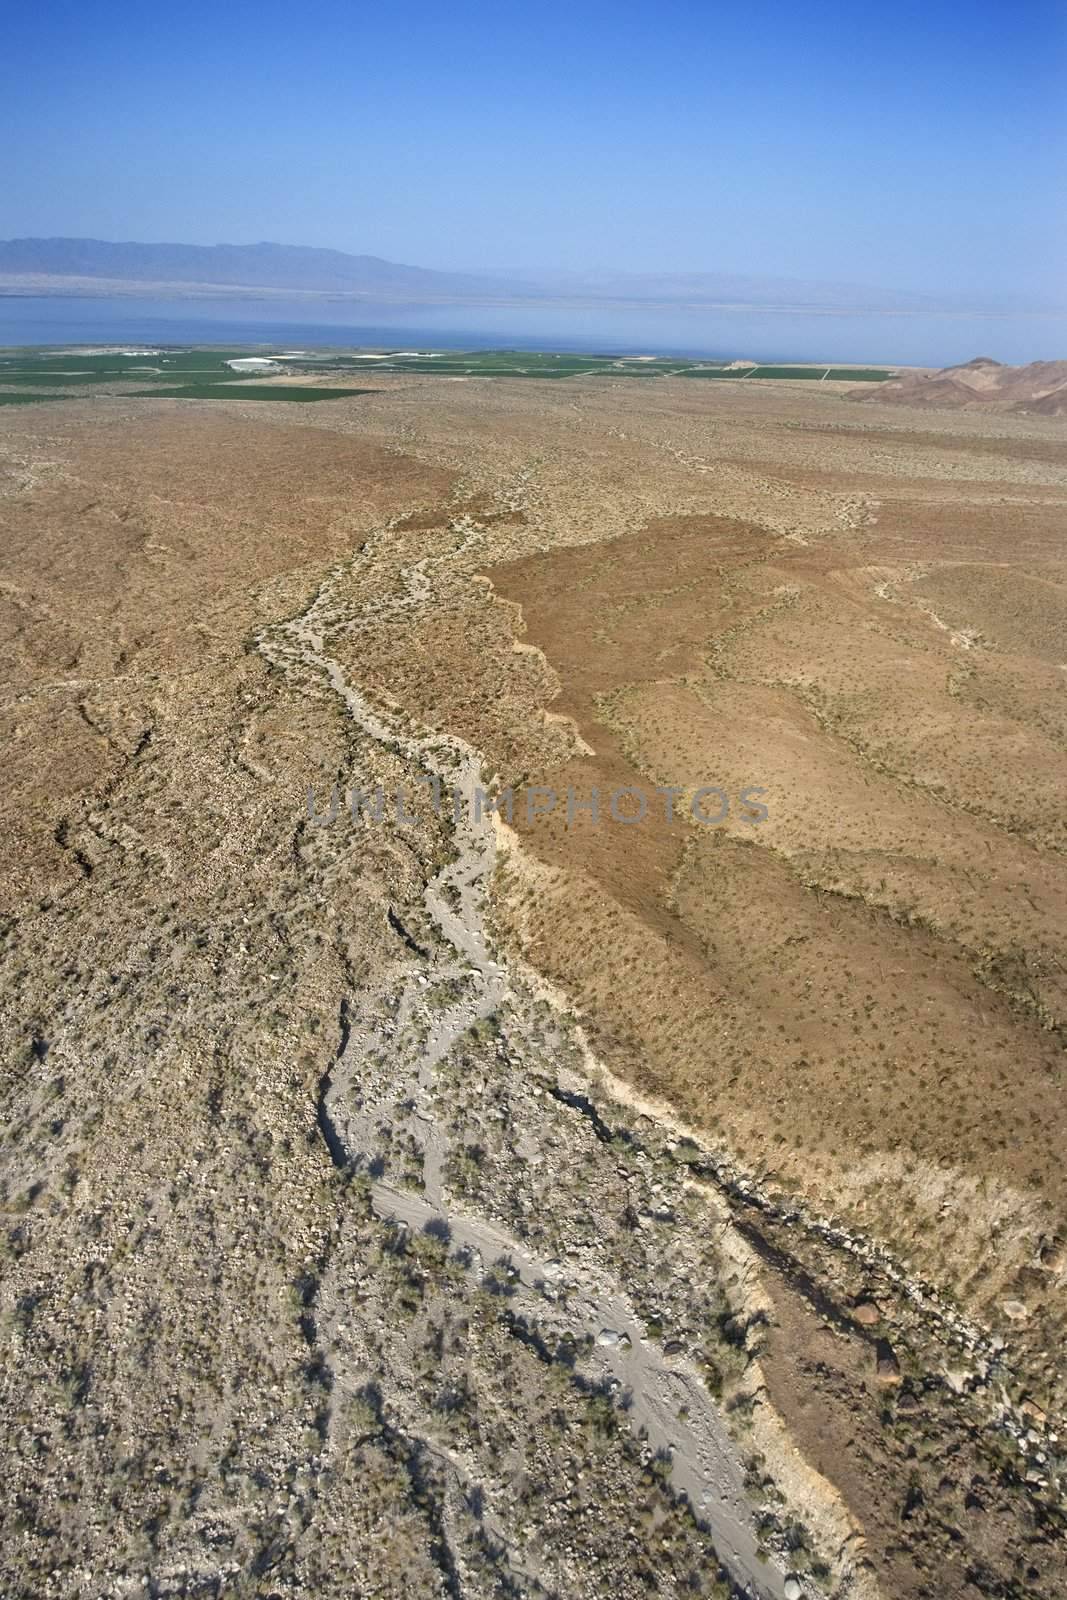 Aerial view of desert with lake and mountains in background.